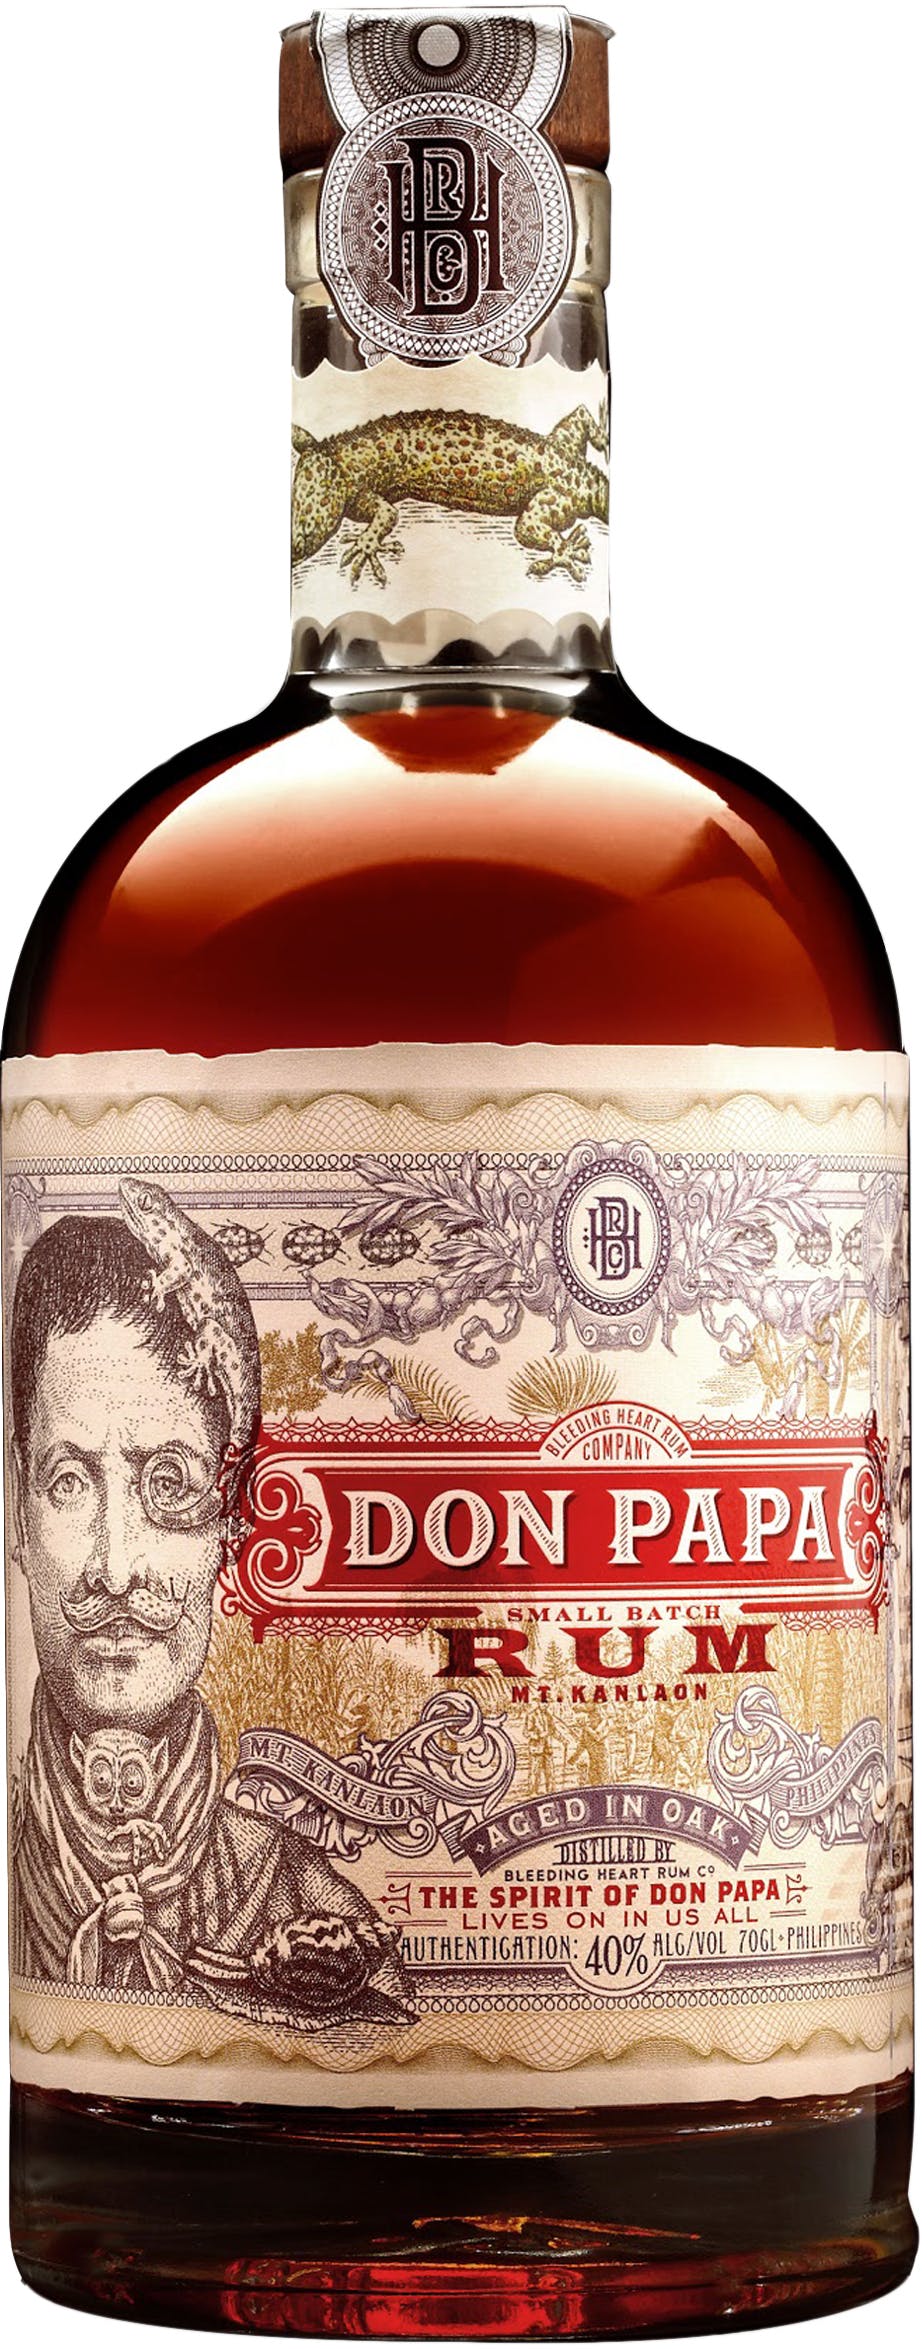 Don Papa Small Batch Oak Aged Rum 7 year old 750ml - Toast Wines by Taste